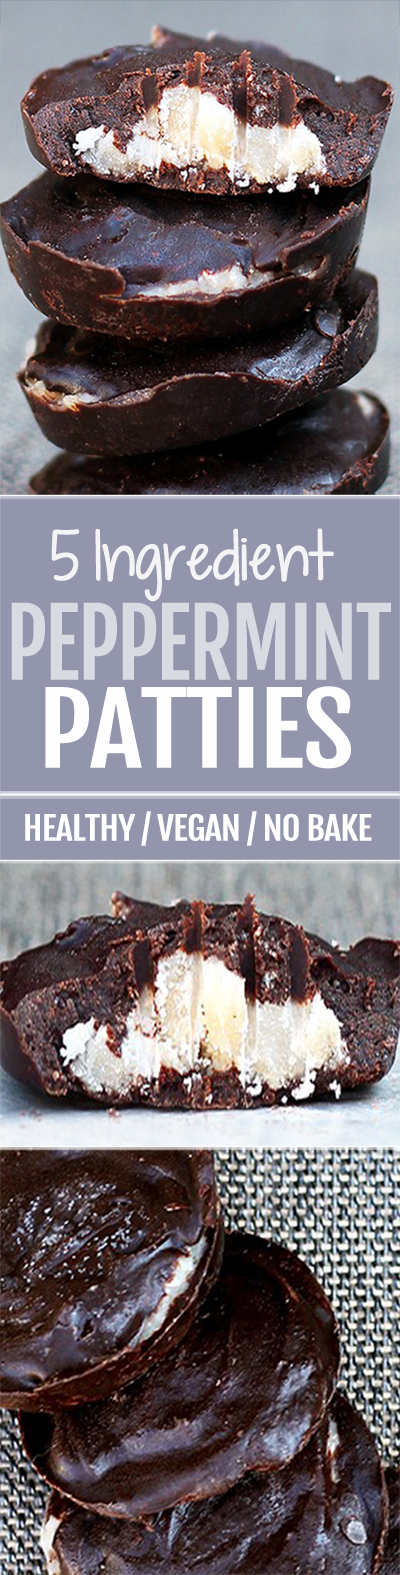 These are so easy to make and impossible to stop eating! Vegan peppermint patties!